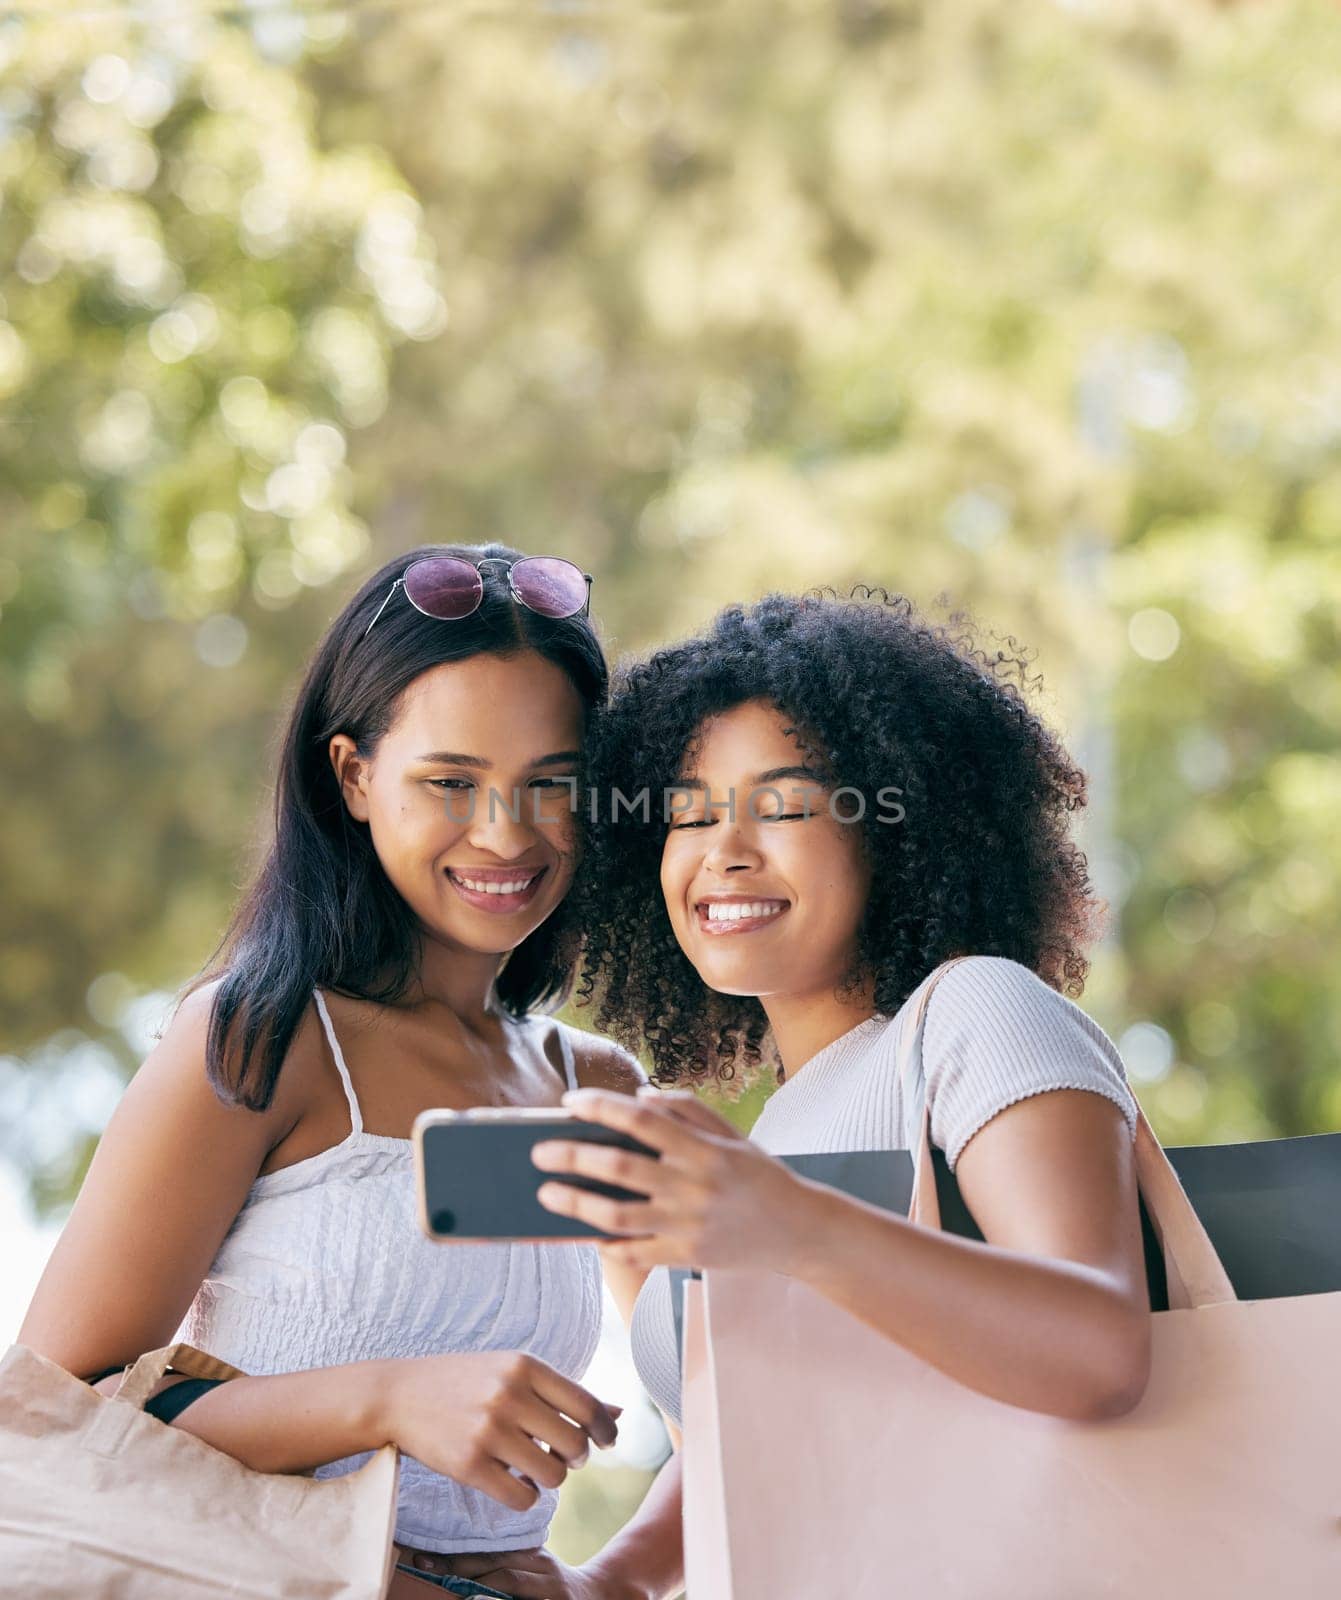 Friends, phone and selfie for retail shopping bonding moment together with smile for purchase choices. Black people, shopper and smartphone photograph of happy gen z women for social media. by YuriArcurs